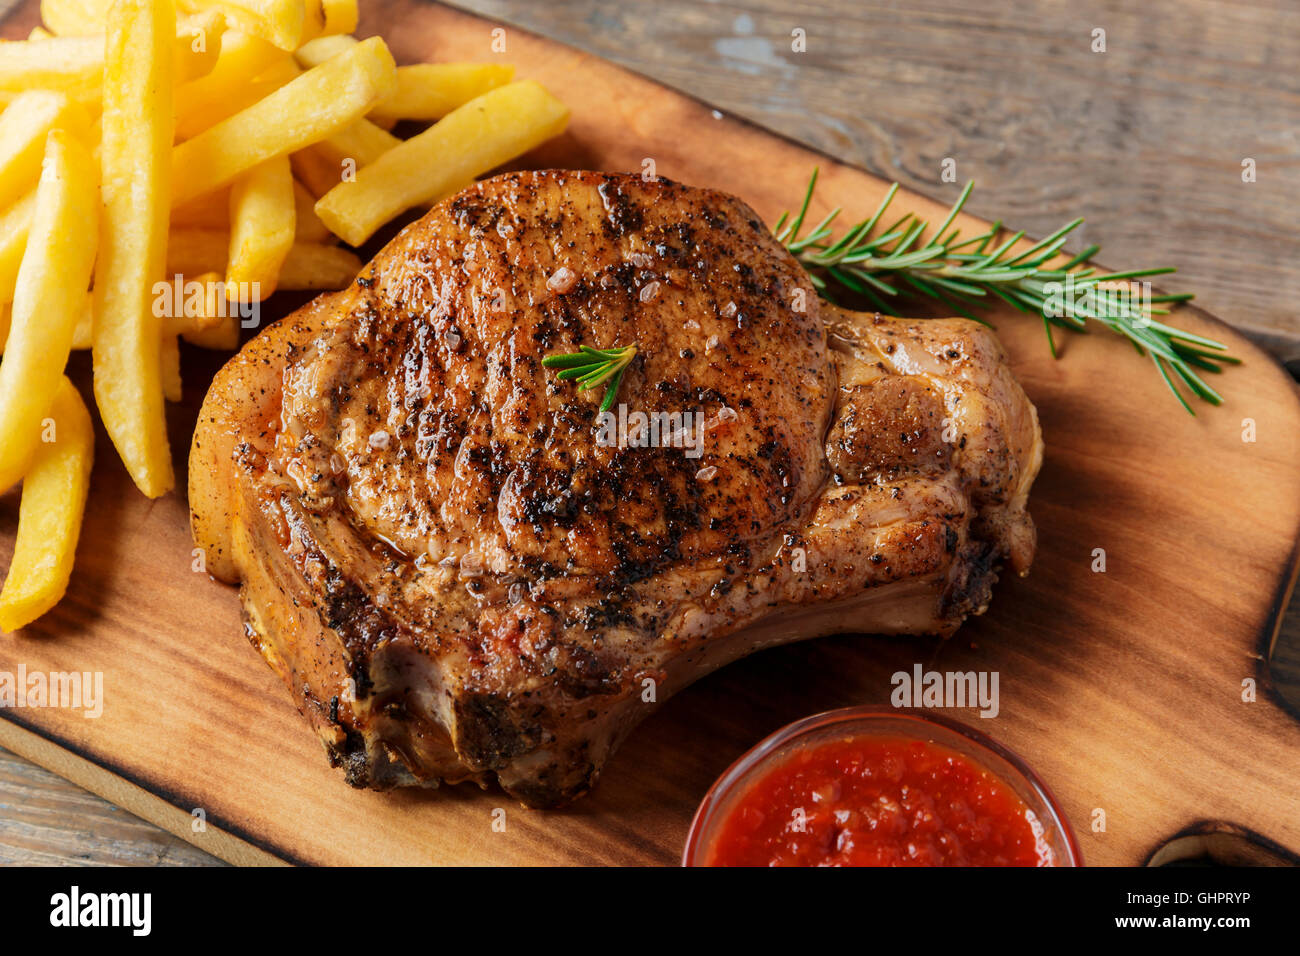 steak on the bone steak with french fries and sauce Stock Photo